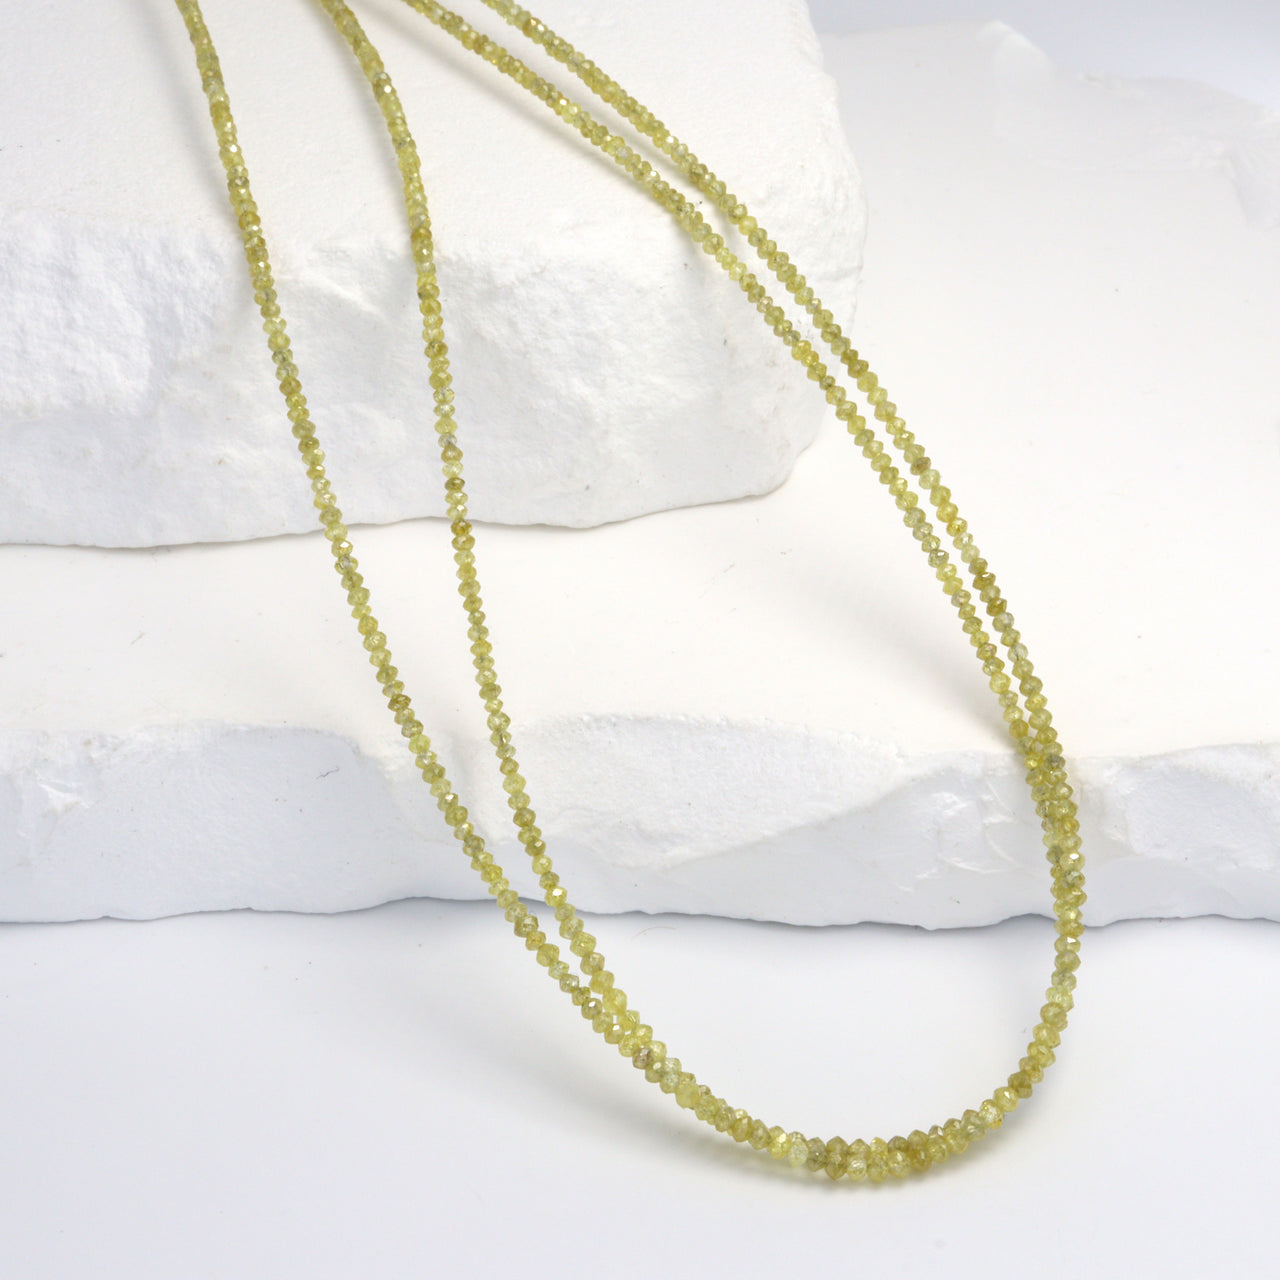 Yellow Diamond 2mm Faceted Rondelles